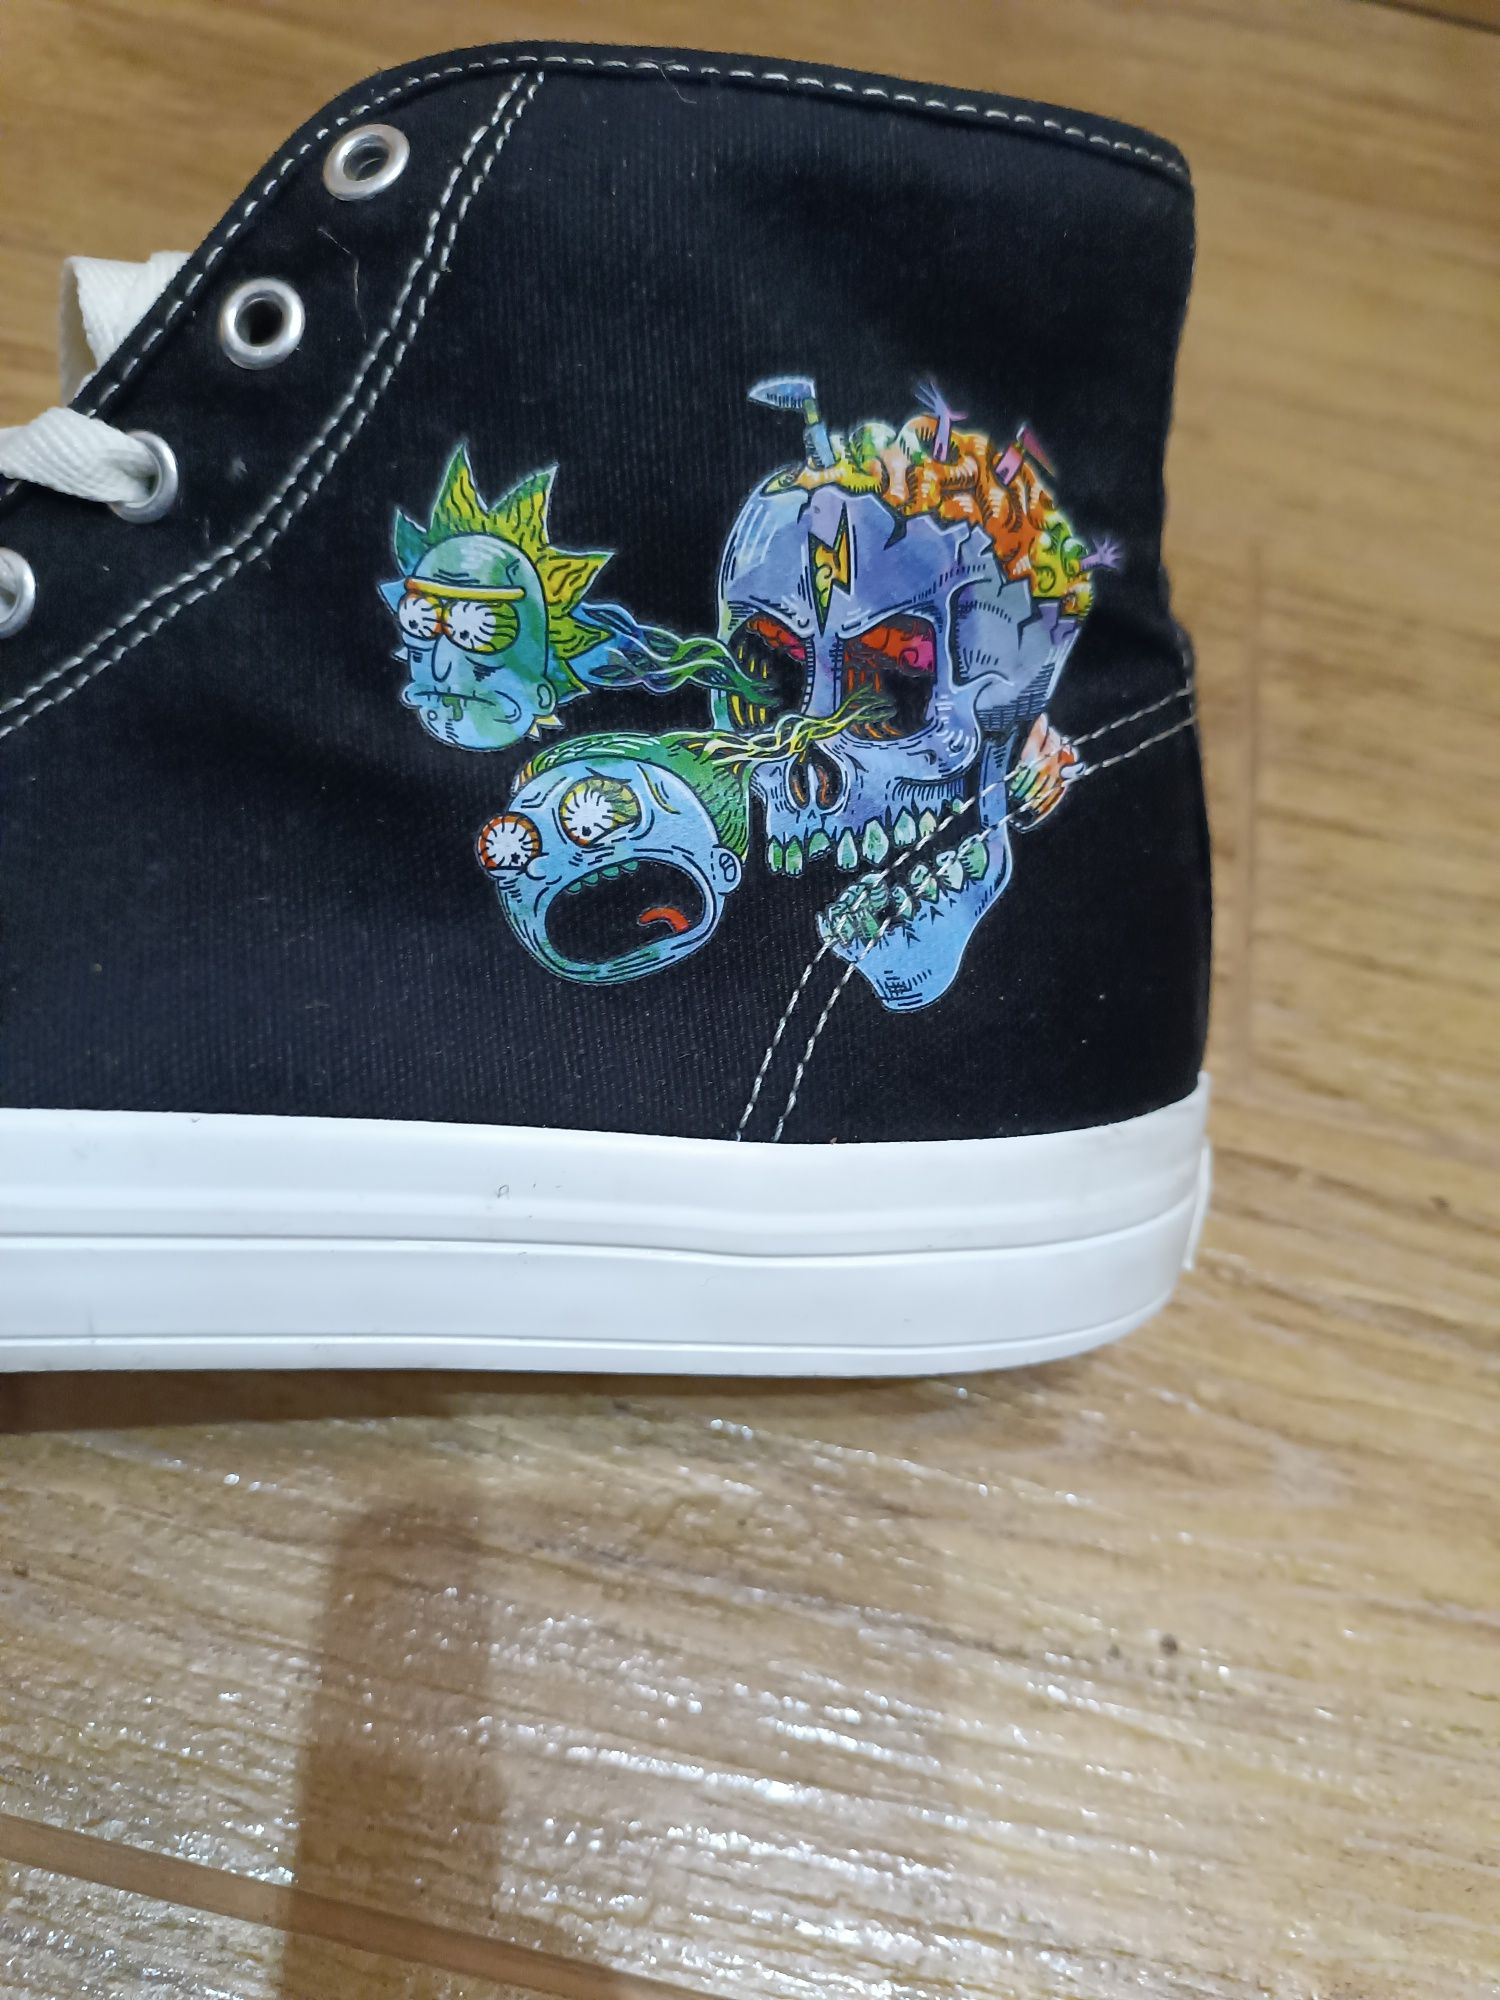 H&M X Rick and Morty shoes